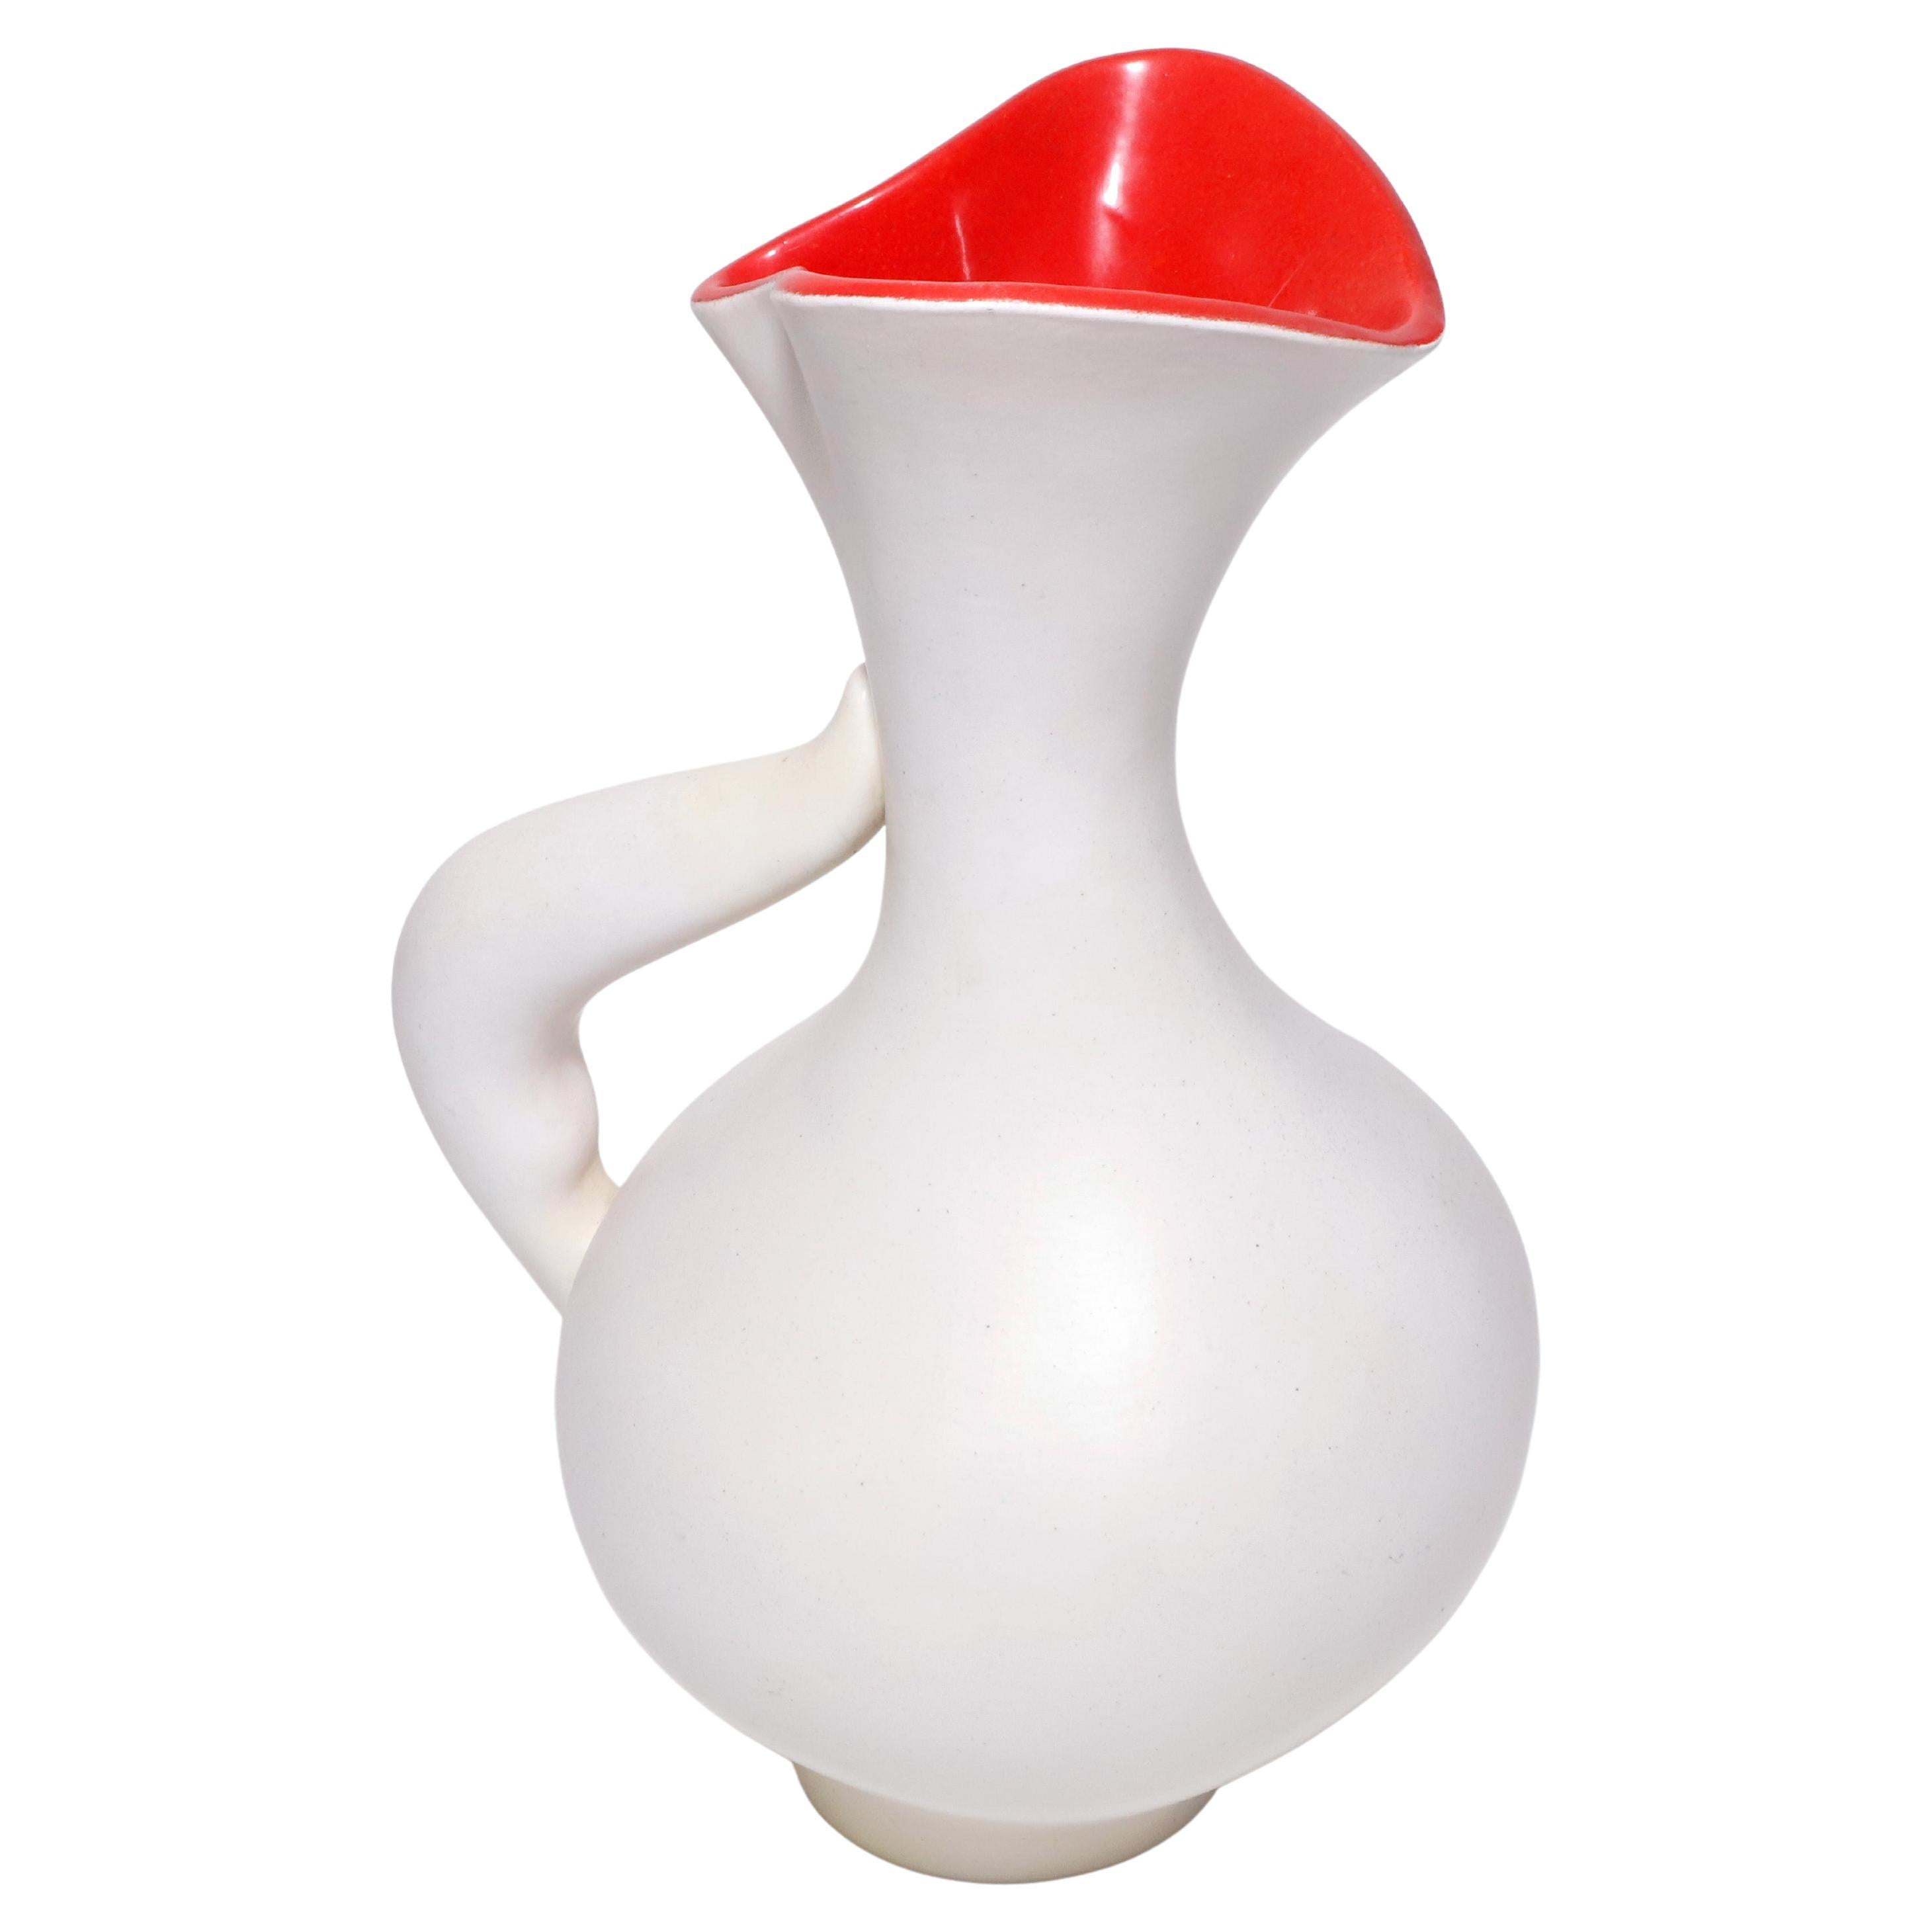 1956 894 Model Pol Chambost Ceramic Pitcher with Red Interior Glaze, Signed For Sale